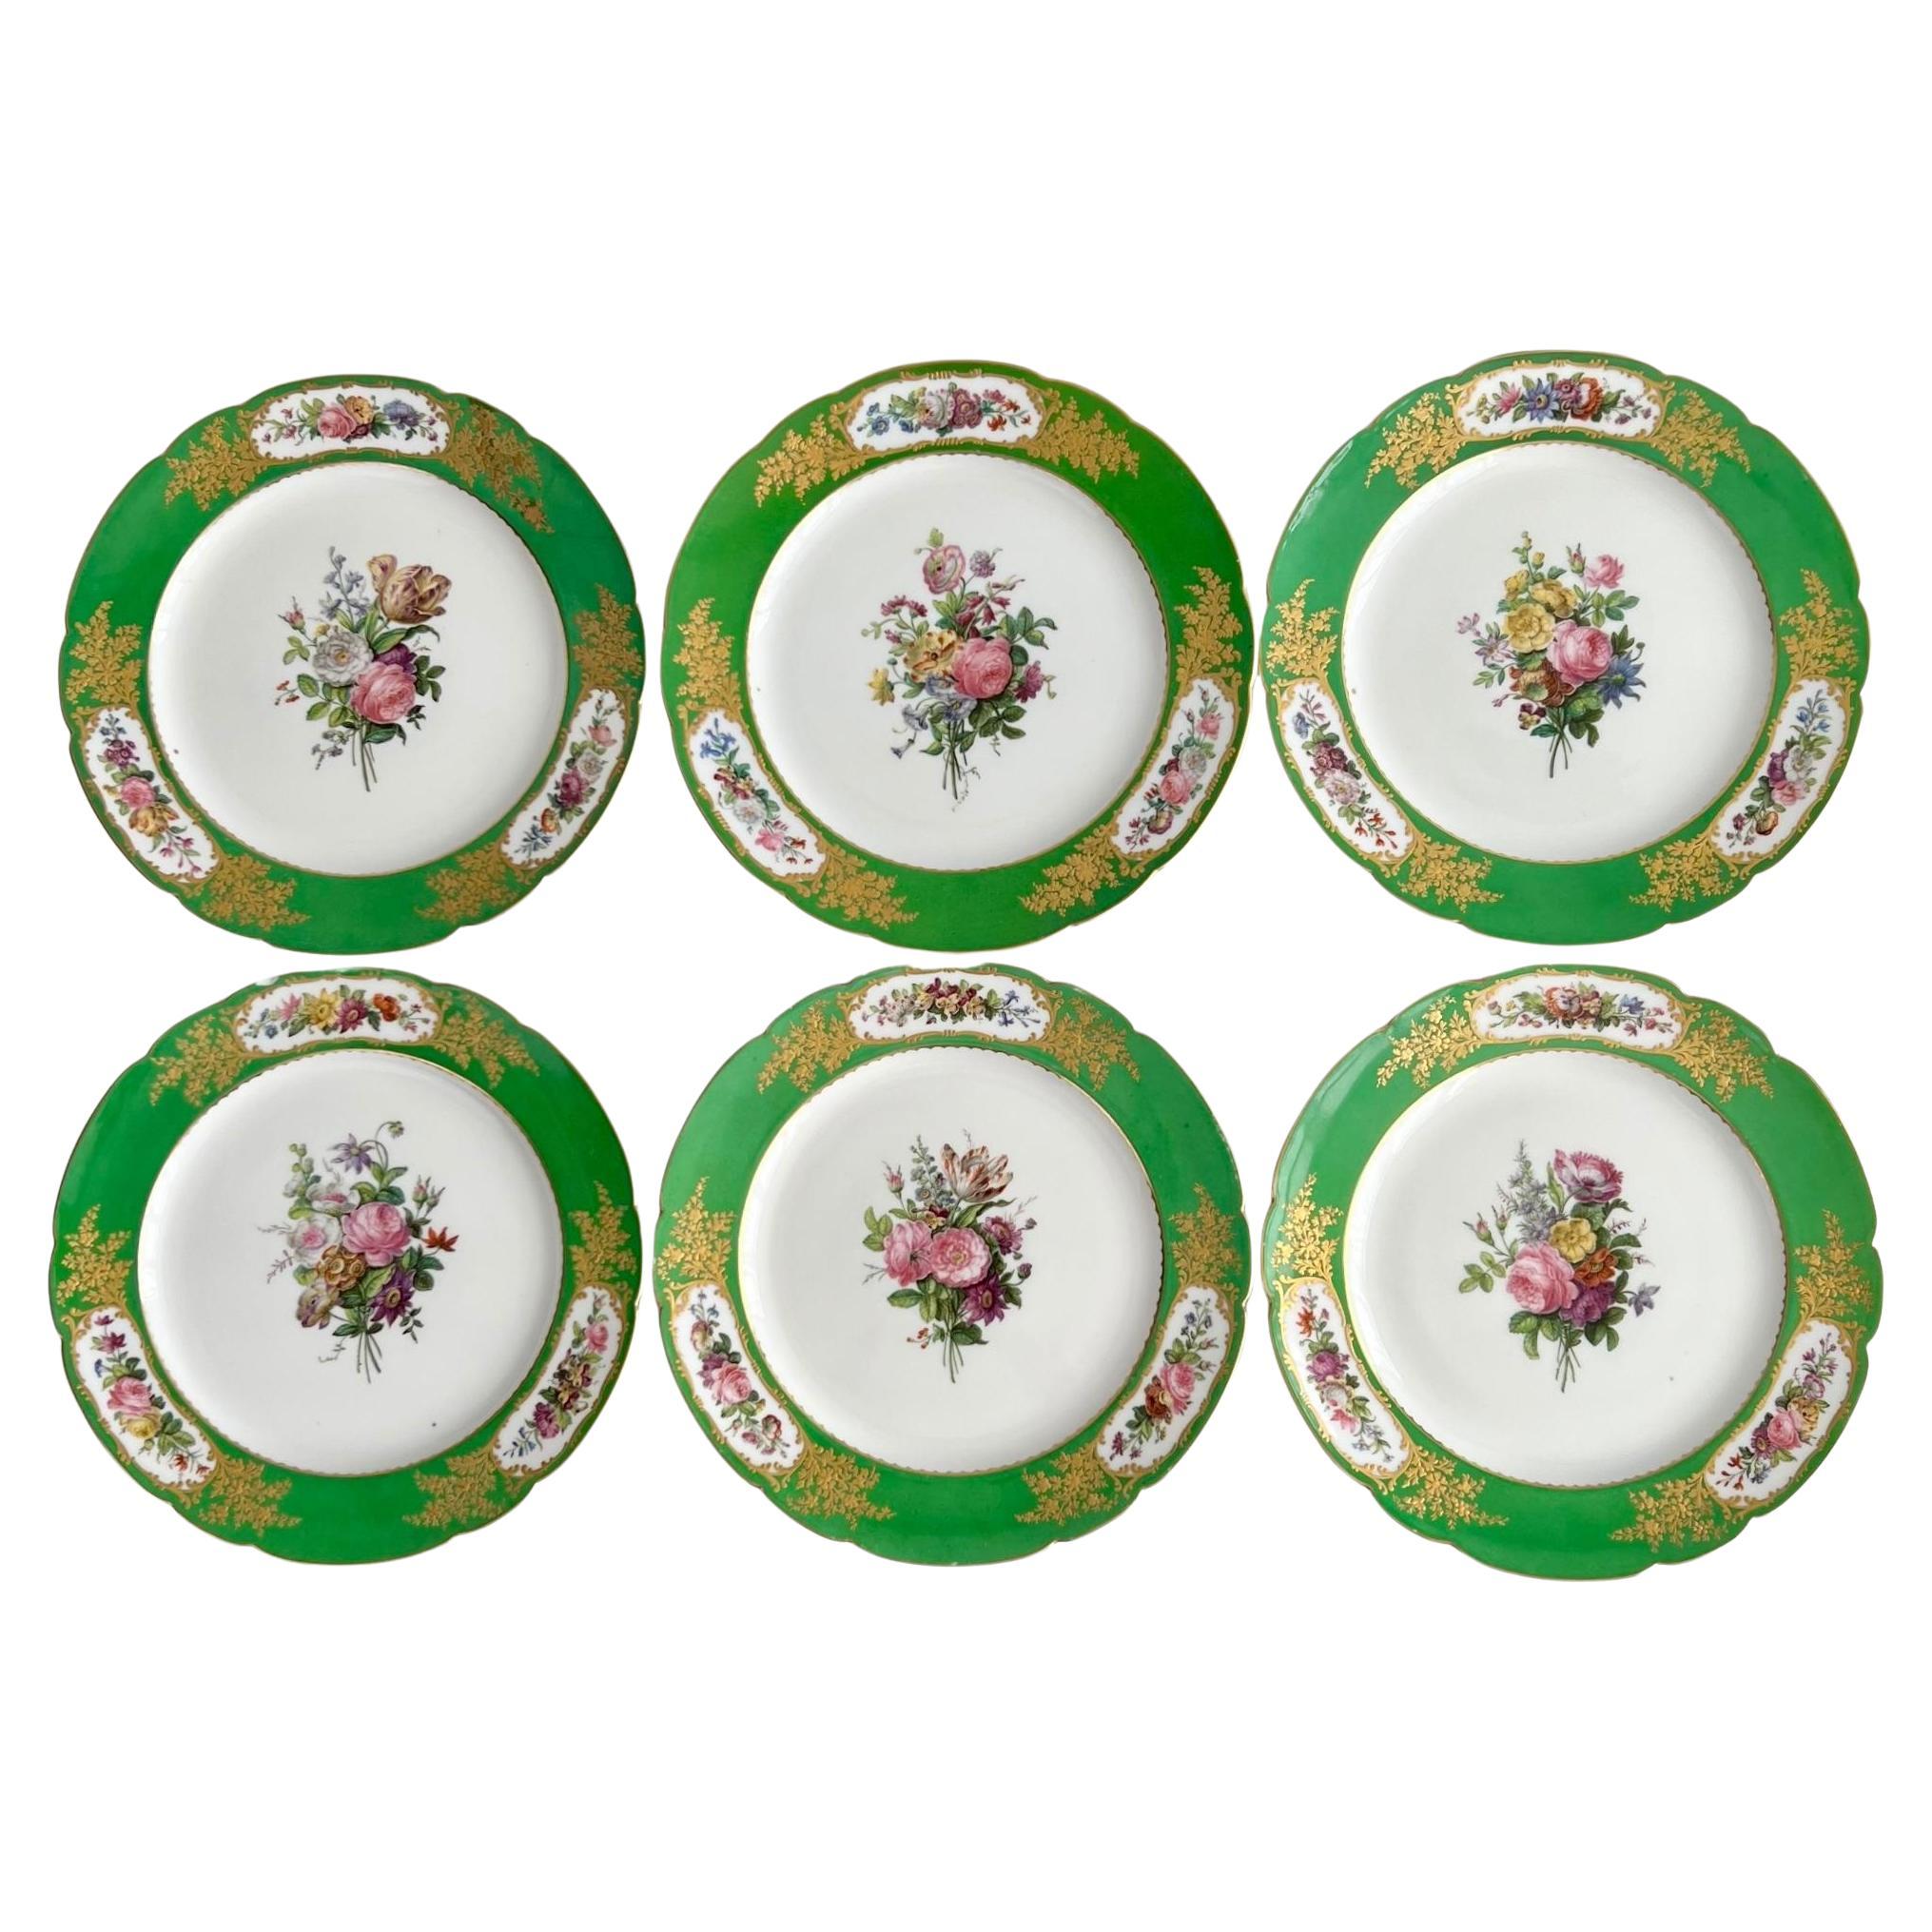 Vieux Paris Feuillet Set of 6 Plates, French Green, Gilt and Flowers, 1817-1834